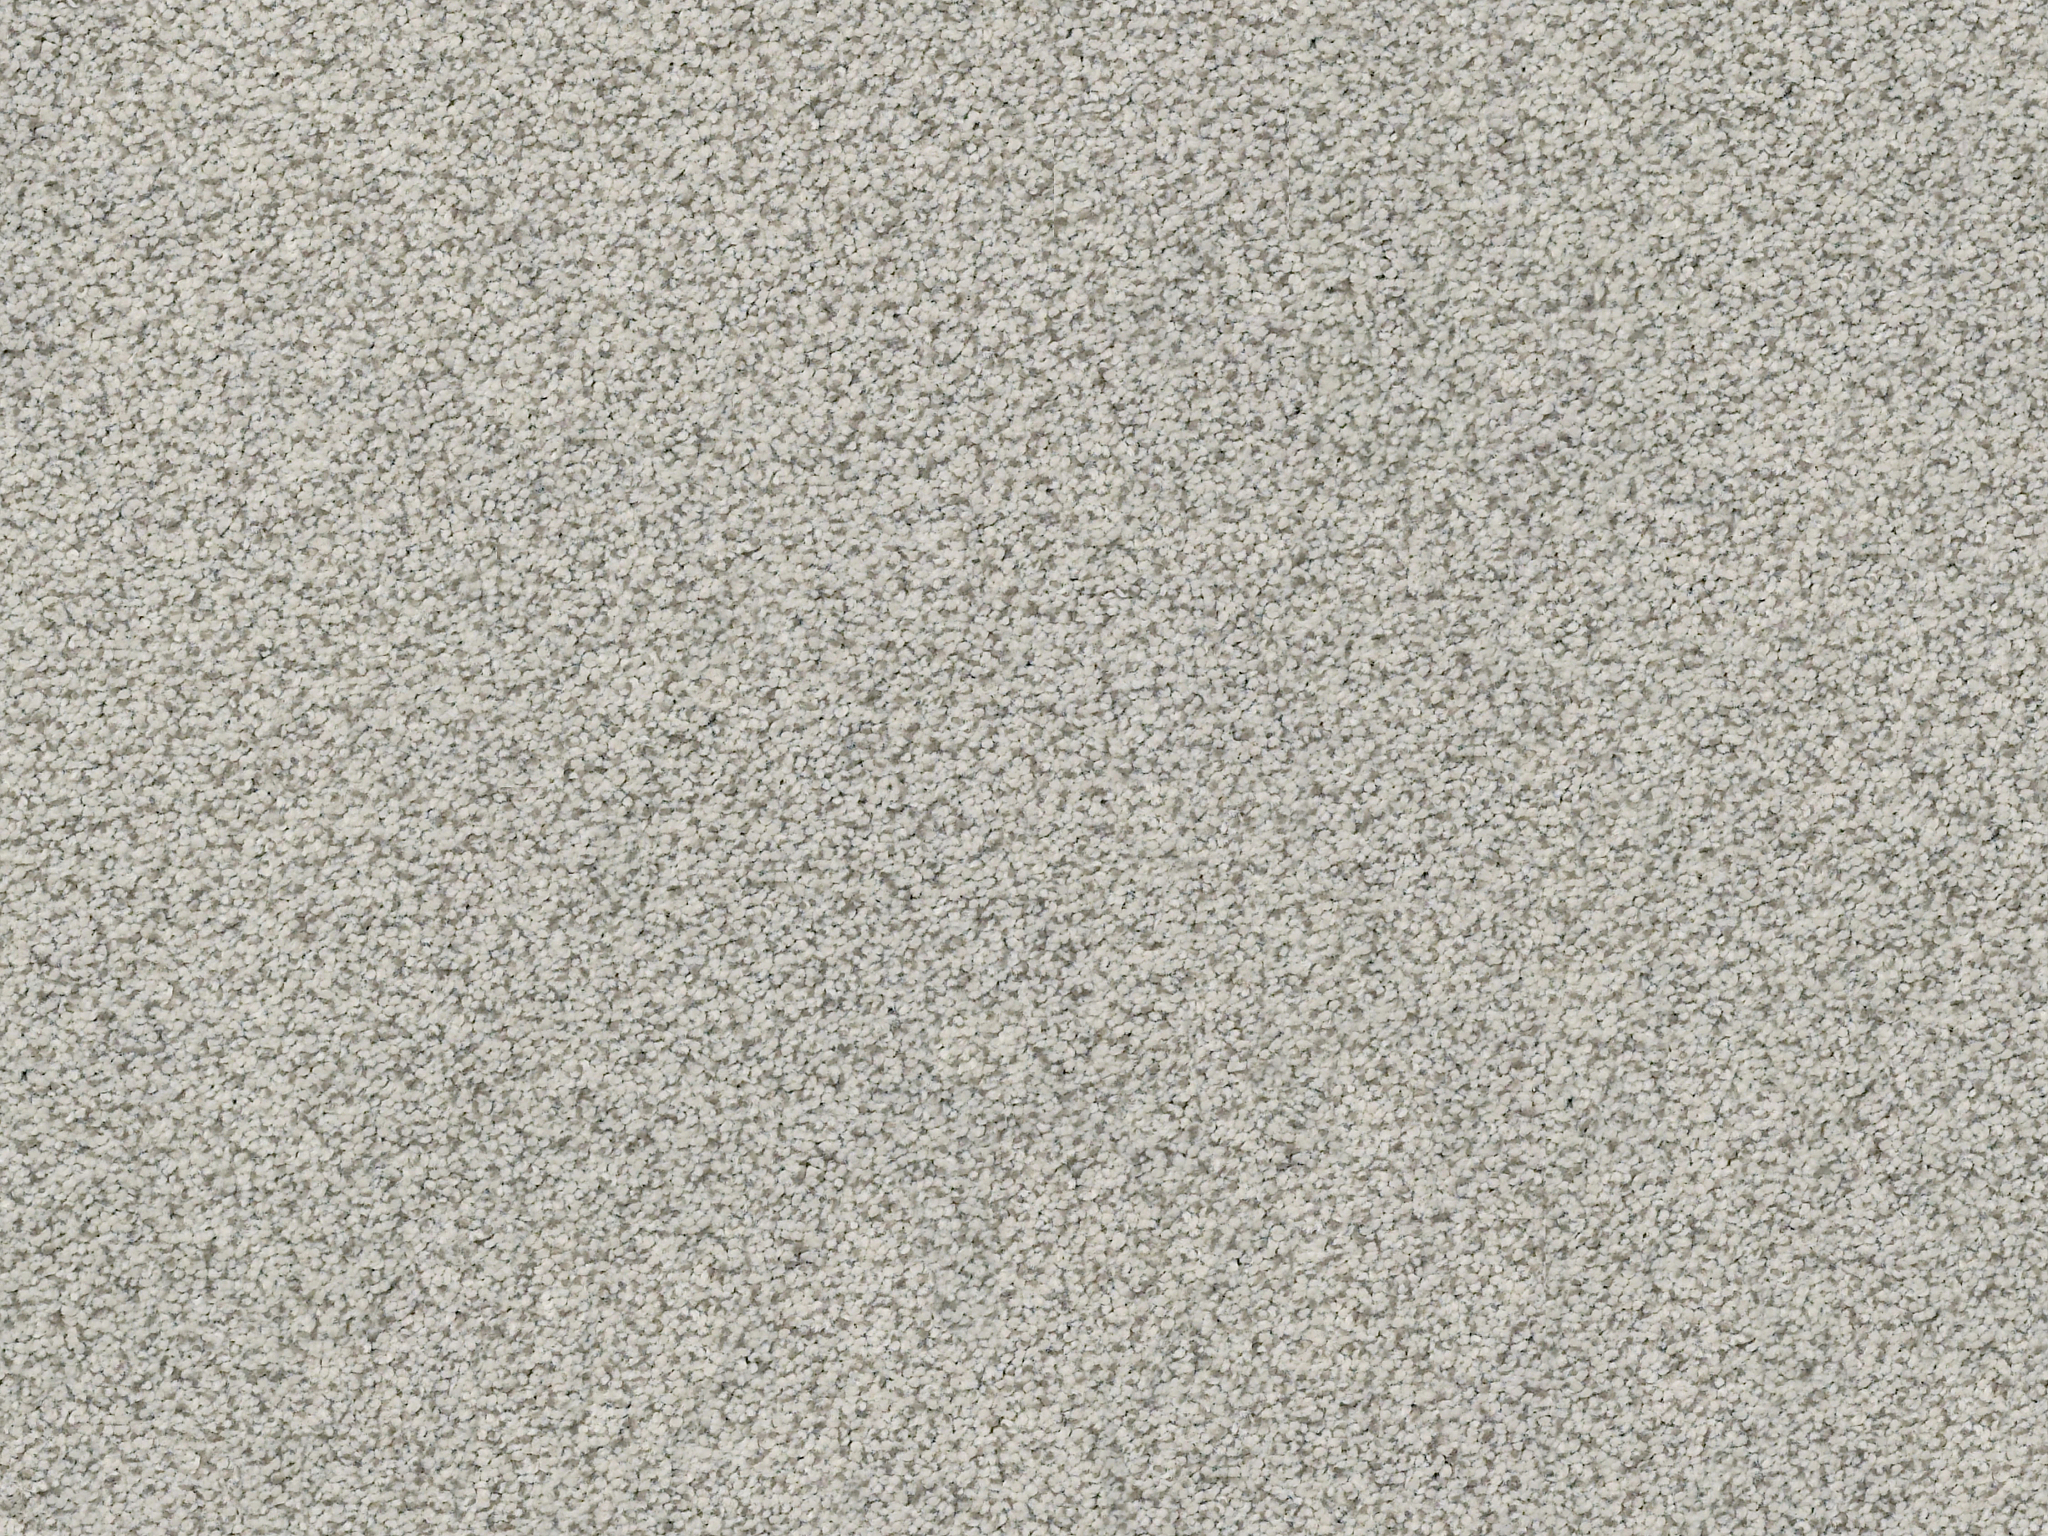 Serenity Cove Carpet - Platinum Zoomed Swatch Image